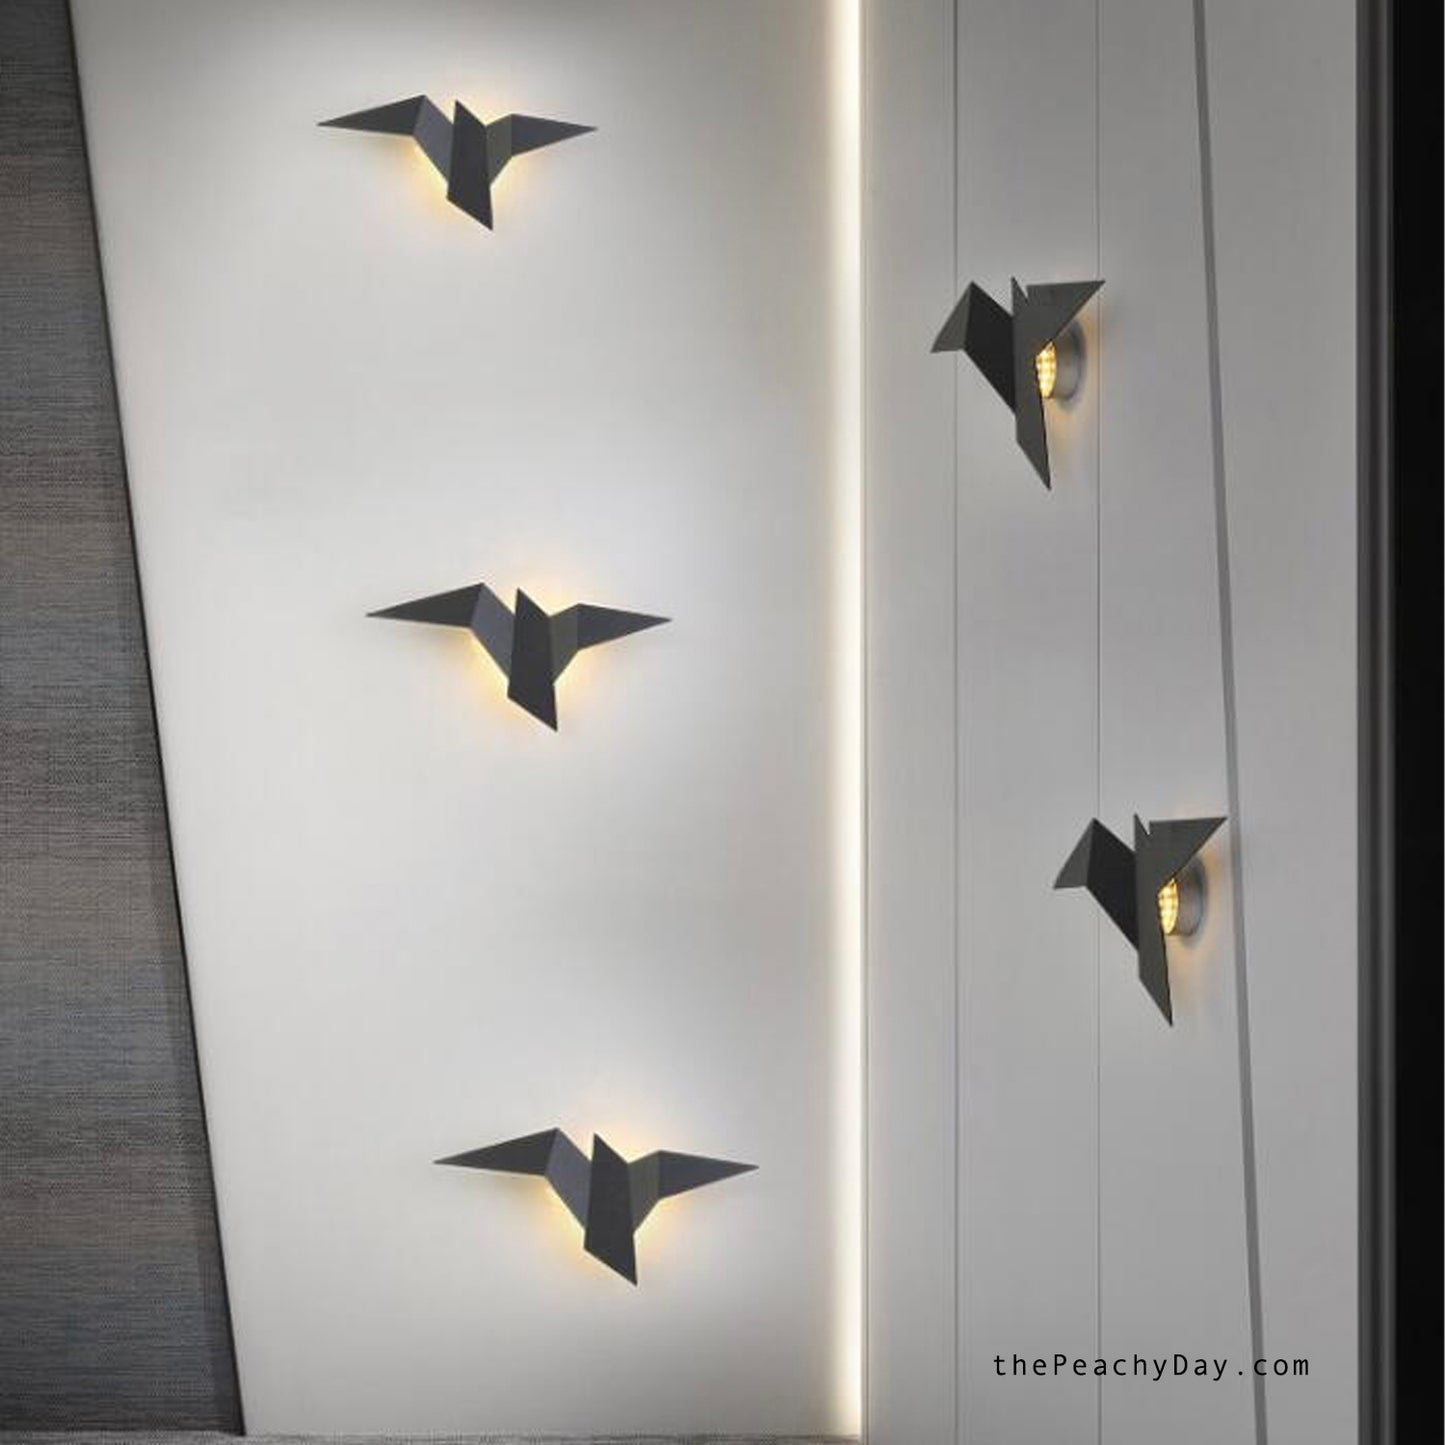 Modern Led Wall Lamp Iron Bird swallow Wall Lamps Living Room Bedroom Home Decor Stairs Light Bedside Wall Light Fixtures wall decorations LED Flying Bird Wall Lamp Wall Sconce Lighting Fixtures Interior Modern Indoor Lighting Night Lights for Home Cafe Bedroom Loft Study Corridor